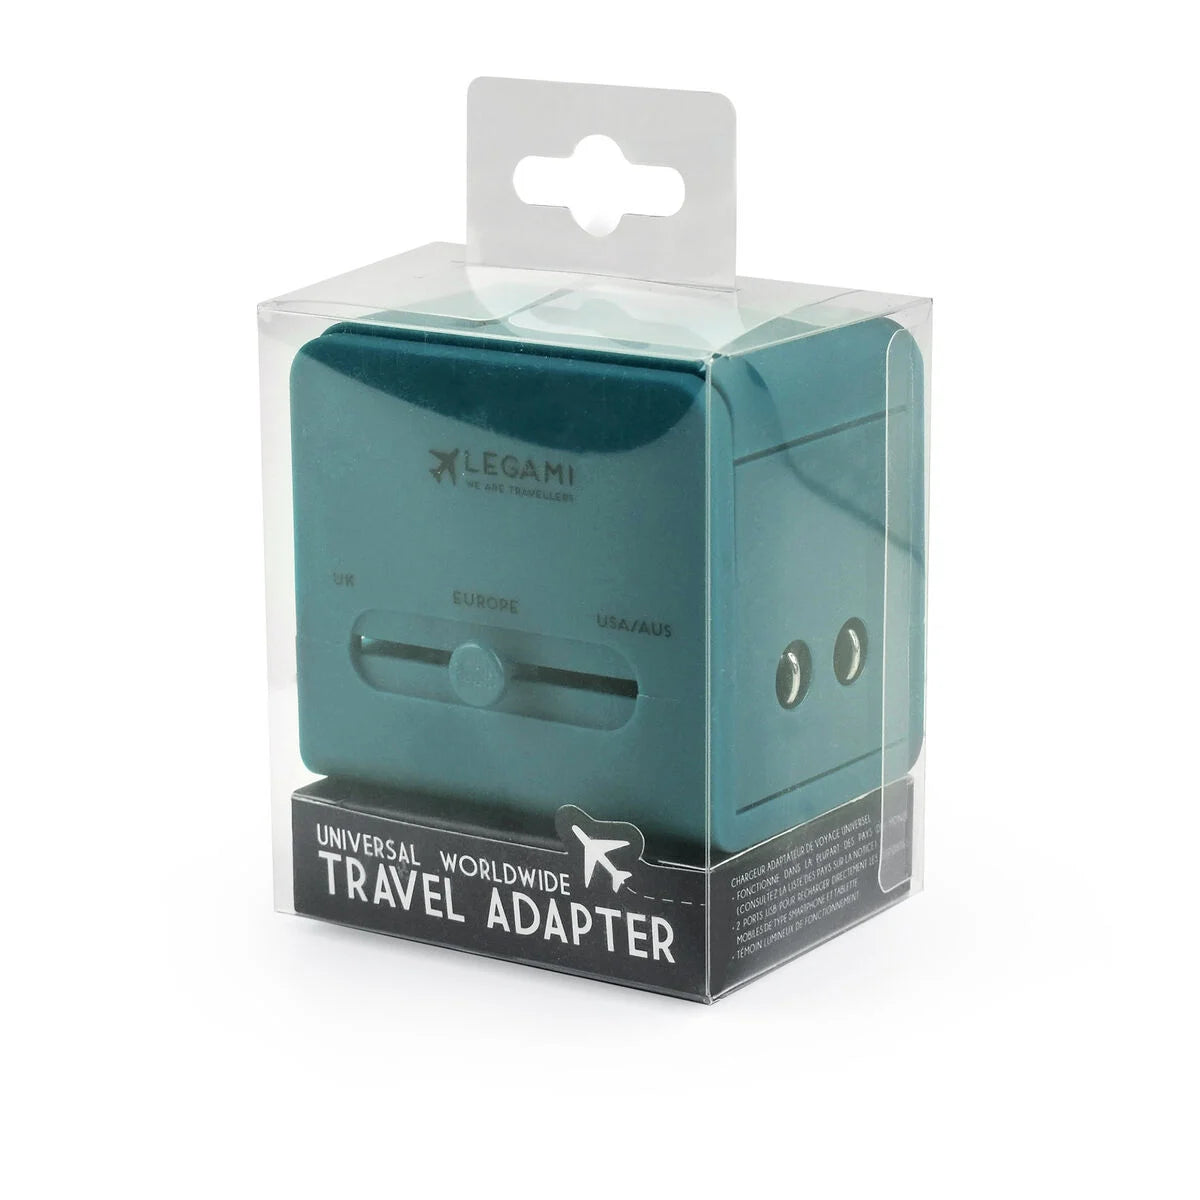 Fab Gifts | Legami Universal Worldwide Travel Adapter Blue by Weirs of Baggot Street